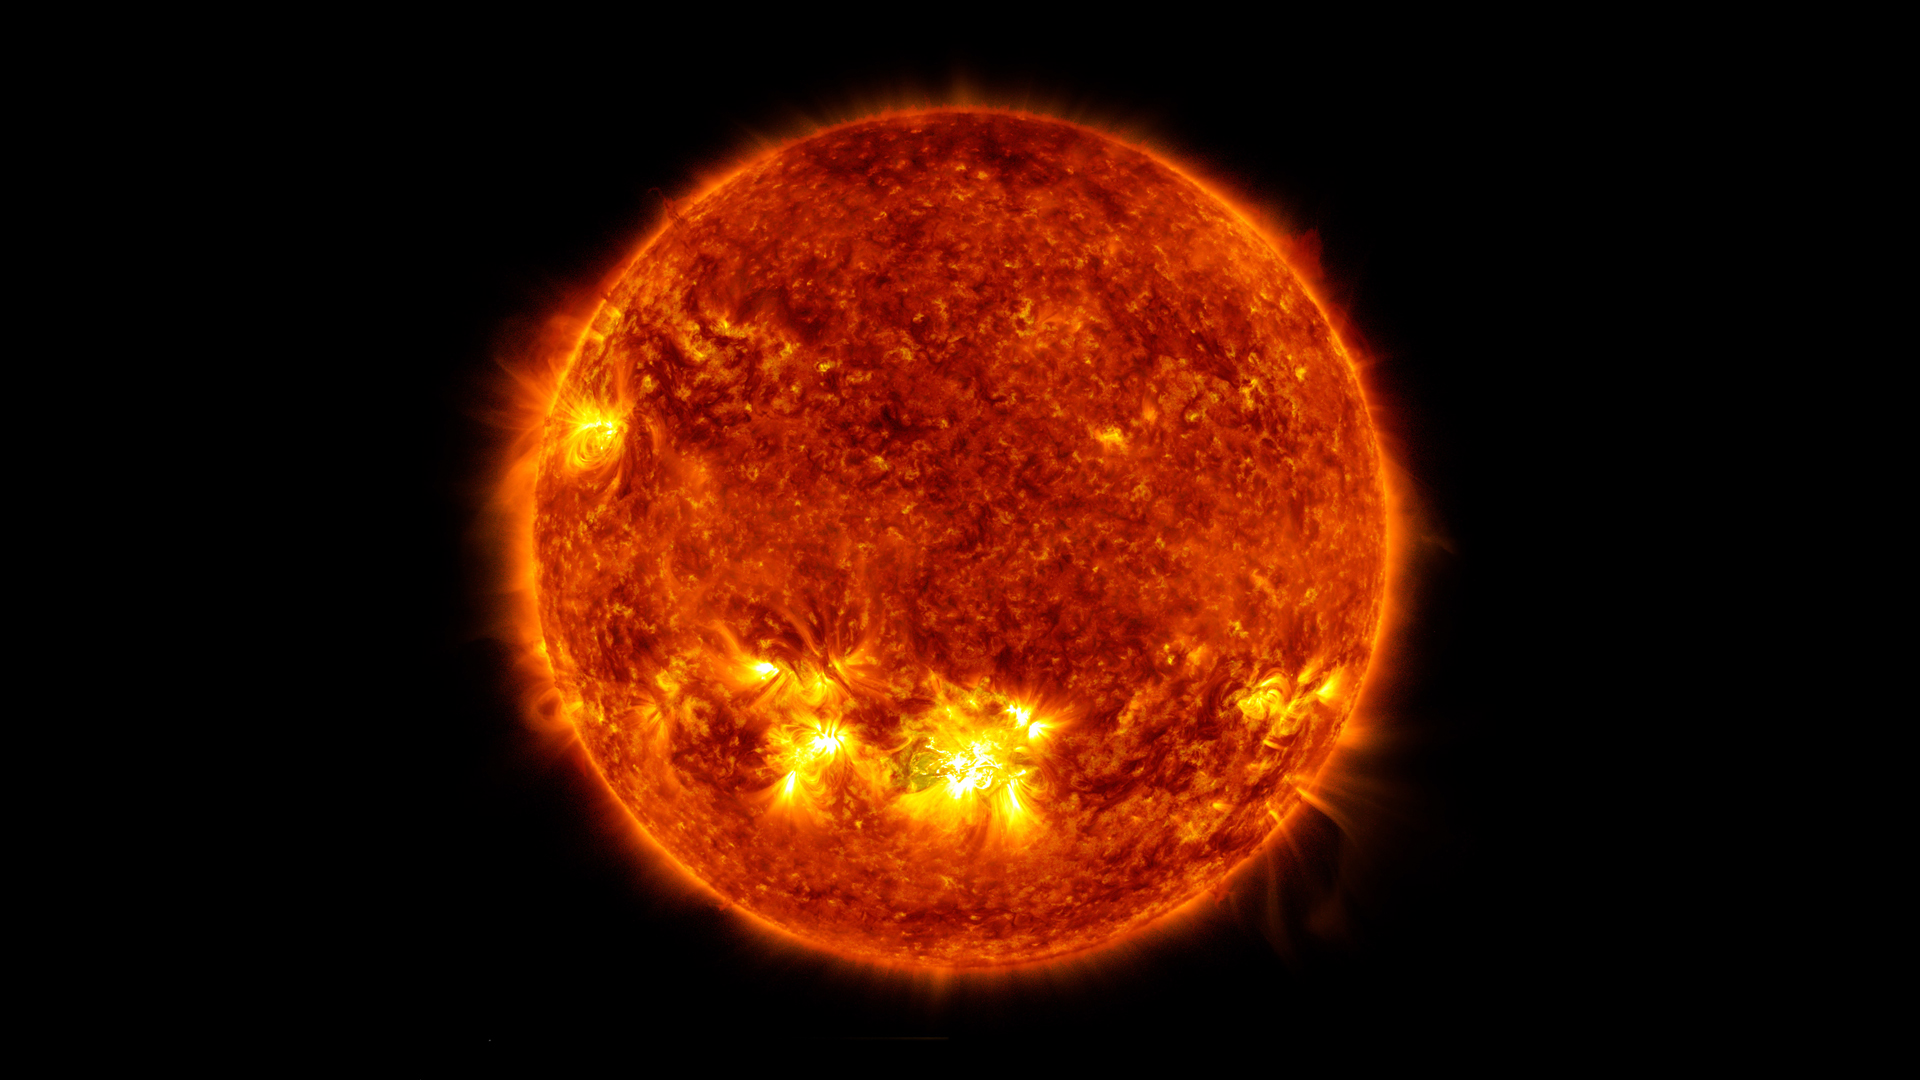 Image of the glowing orange and yellow orb that is the sun.